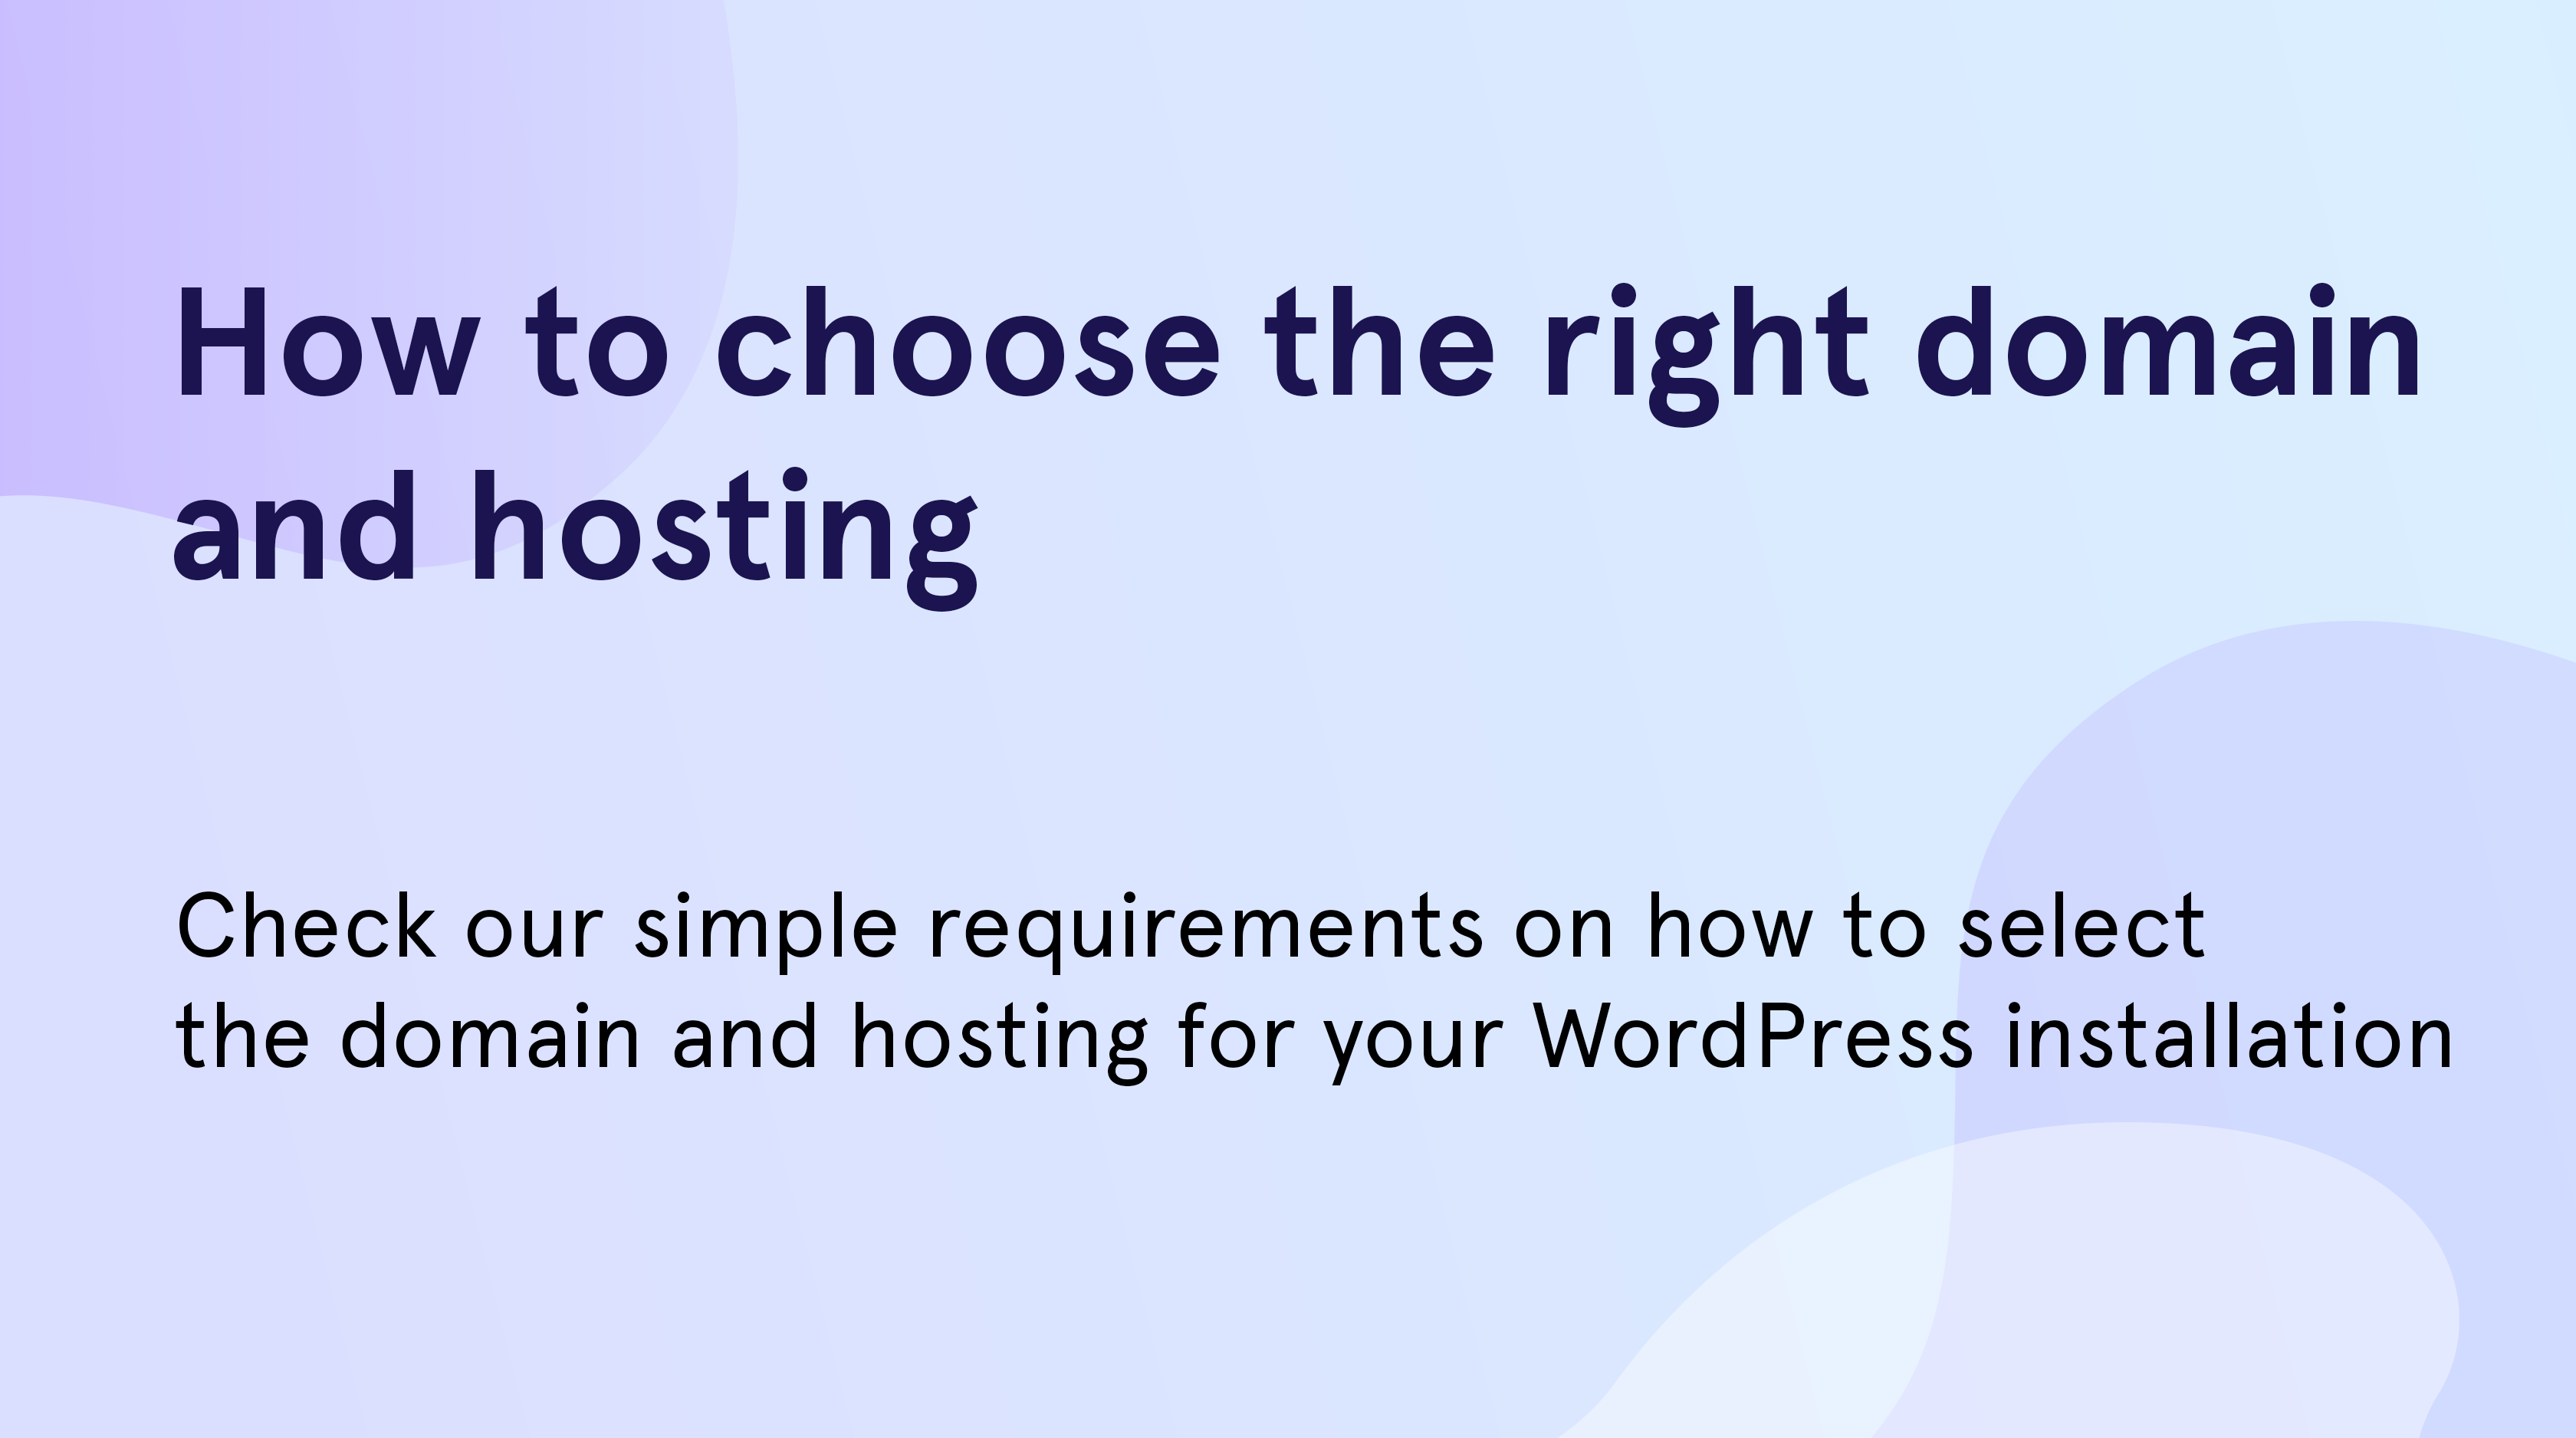 How To Choose The Right Domain And Hosting To Install Wordpress Images, Photos, Reviews